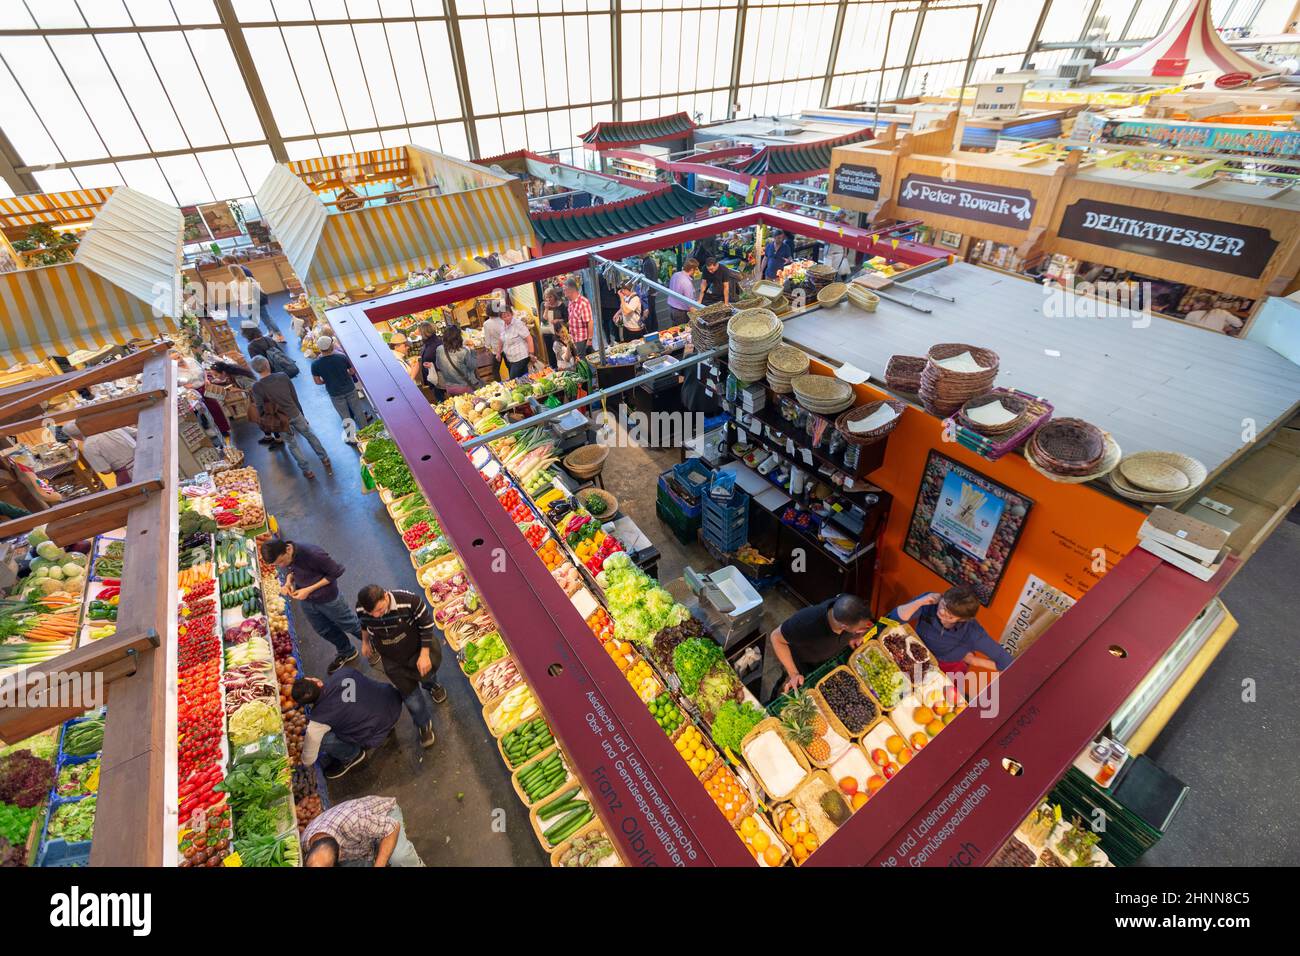 View of the Kleinmarkthalle, a traditional covered market that sells fruit, vegetable and seafood on Hasengasse in Frankfurt, Germany Stock Photo